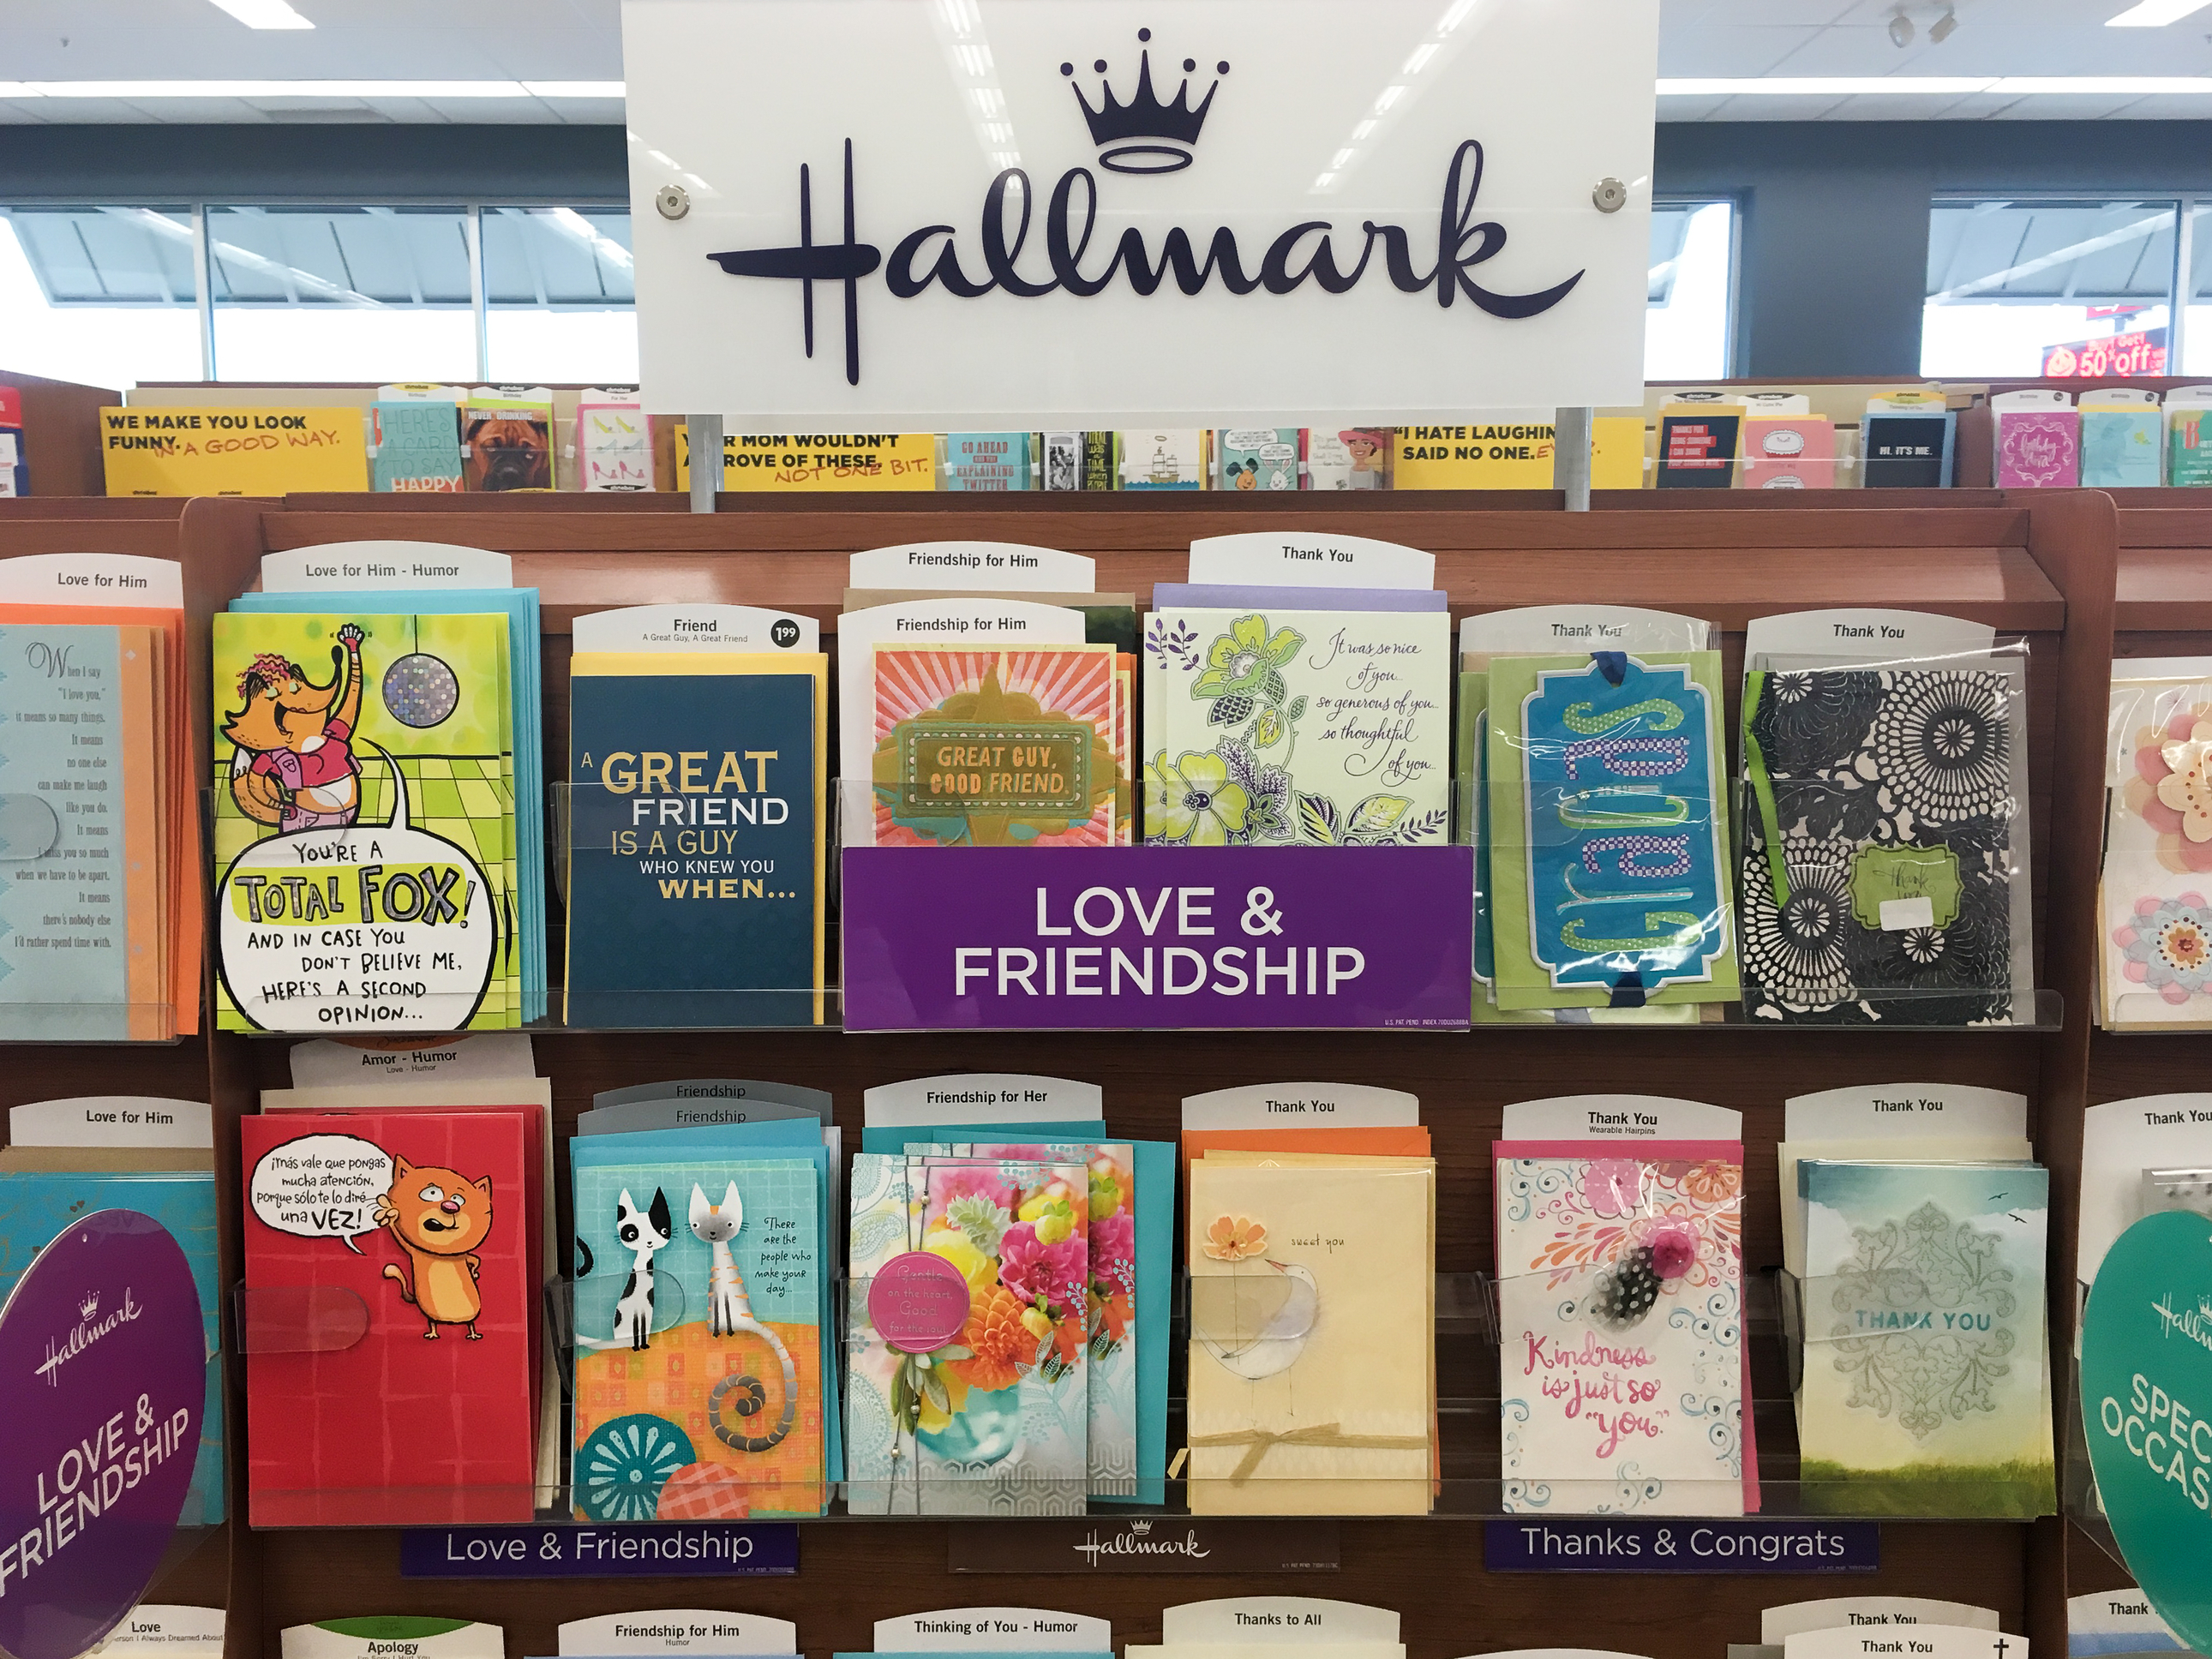 Hallmark coupon: Save $5 on your purchase of $10 or more